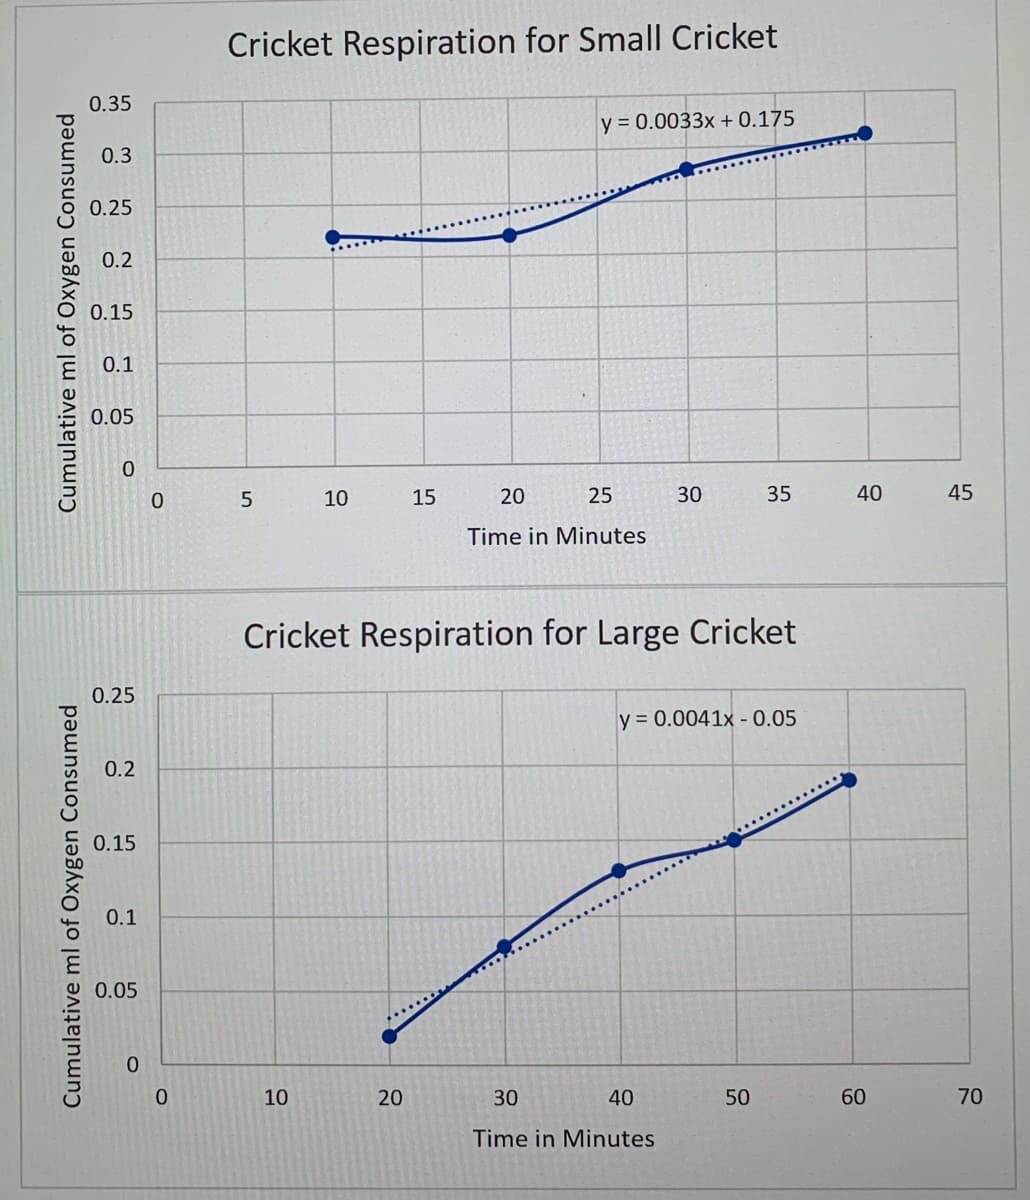 Cricket Respiration for Small Cricket
0.35
y = 0.0033x + 0.175
0.3
0.25
0.2
0.15
0.1
0.05
5
10
15
20
25
30
35
40
45
Time in Minutes
Cricket Respiration for Large Cricket
0.25
y = 0.0041x - 0.05
0.2
0.15
0.1
0.05
10
20
30
40
50
60
70
Time in Minutes
Cumulative ml of Oxygen Consumed
Cumulative ml of Oxygen Consumed
